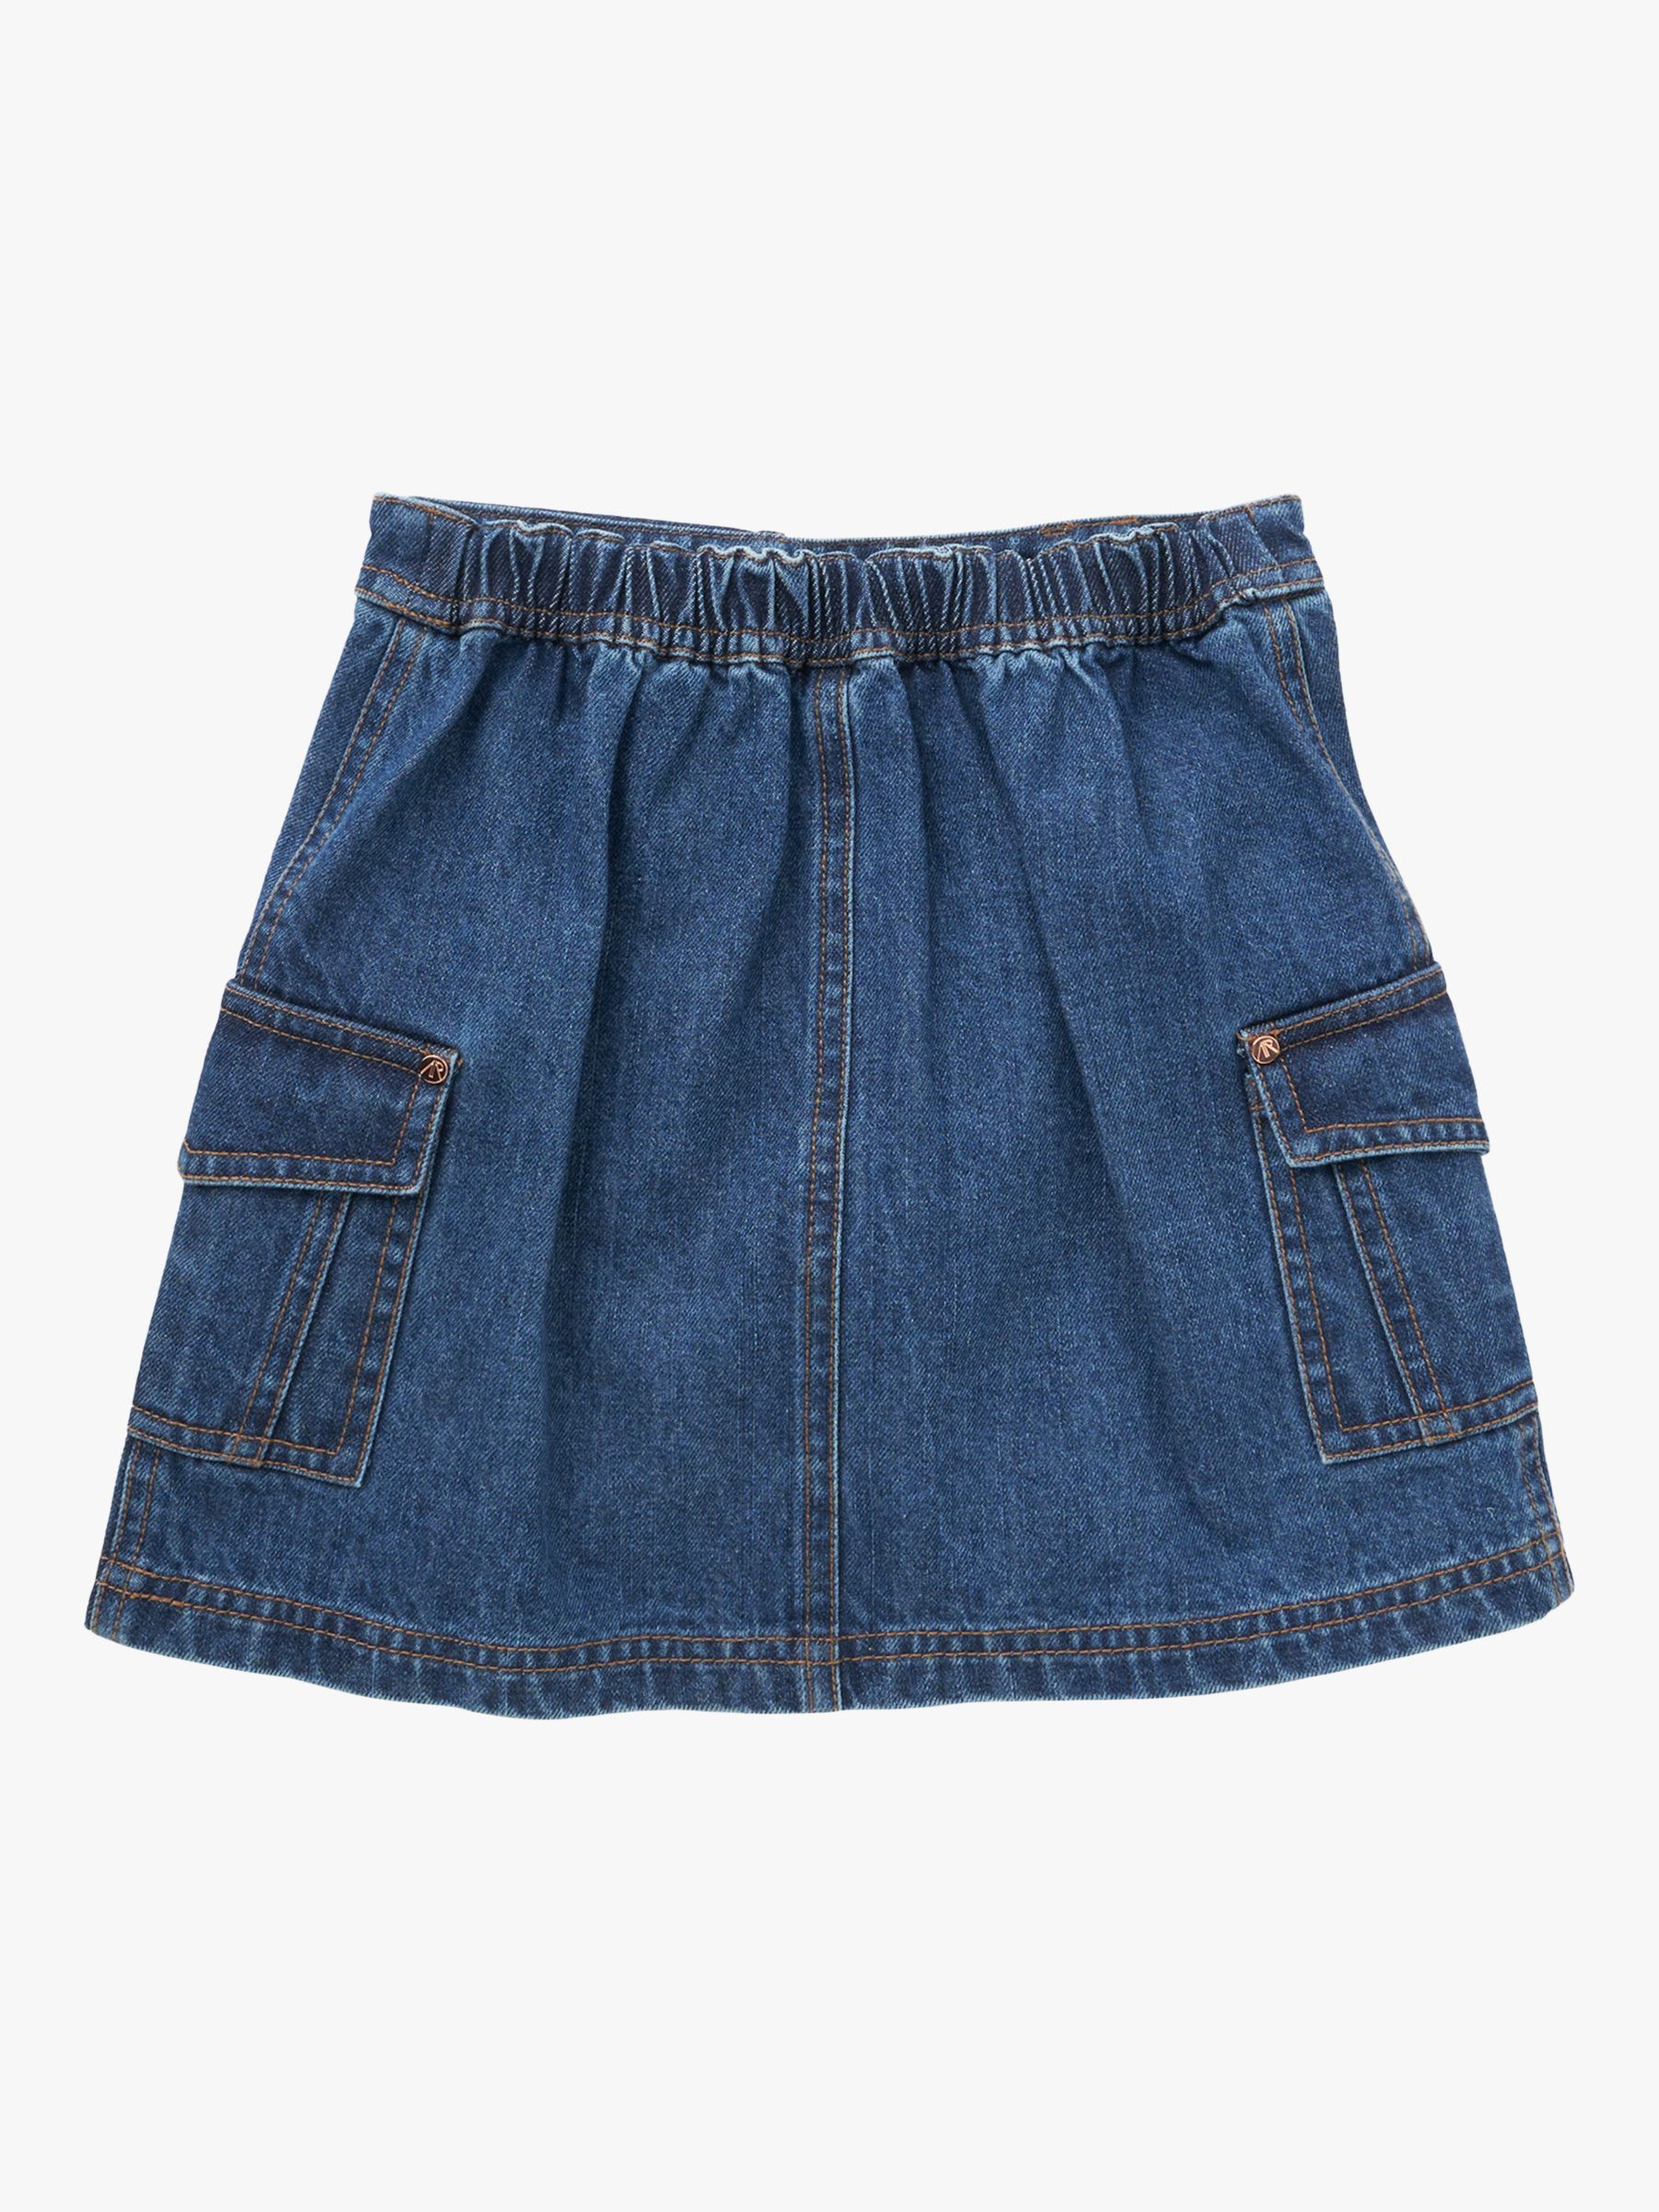 Hate The Game Denim Cargo Mini Skirt ✈️Fly Girls Like Fly Fits✈️It's  NATIONAL FLY GIRLS DAY We The Shxx 💅🏾🔥🔥🥵 C